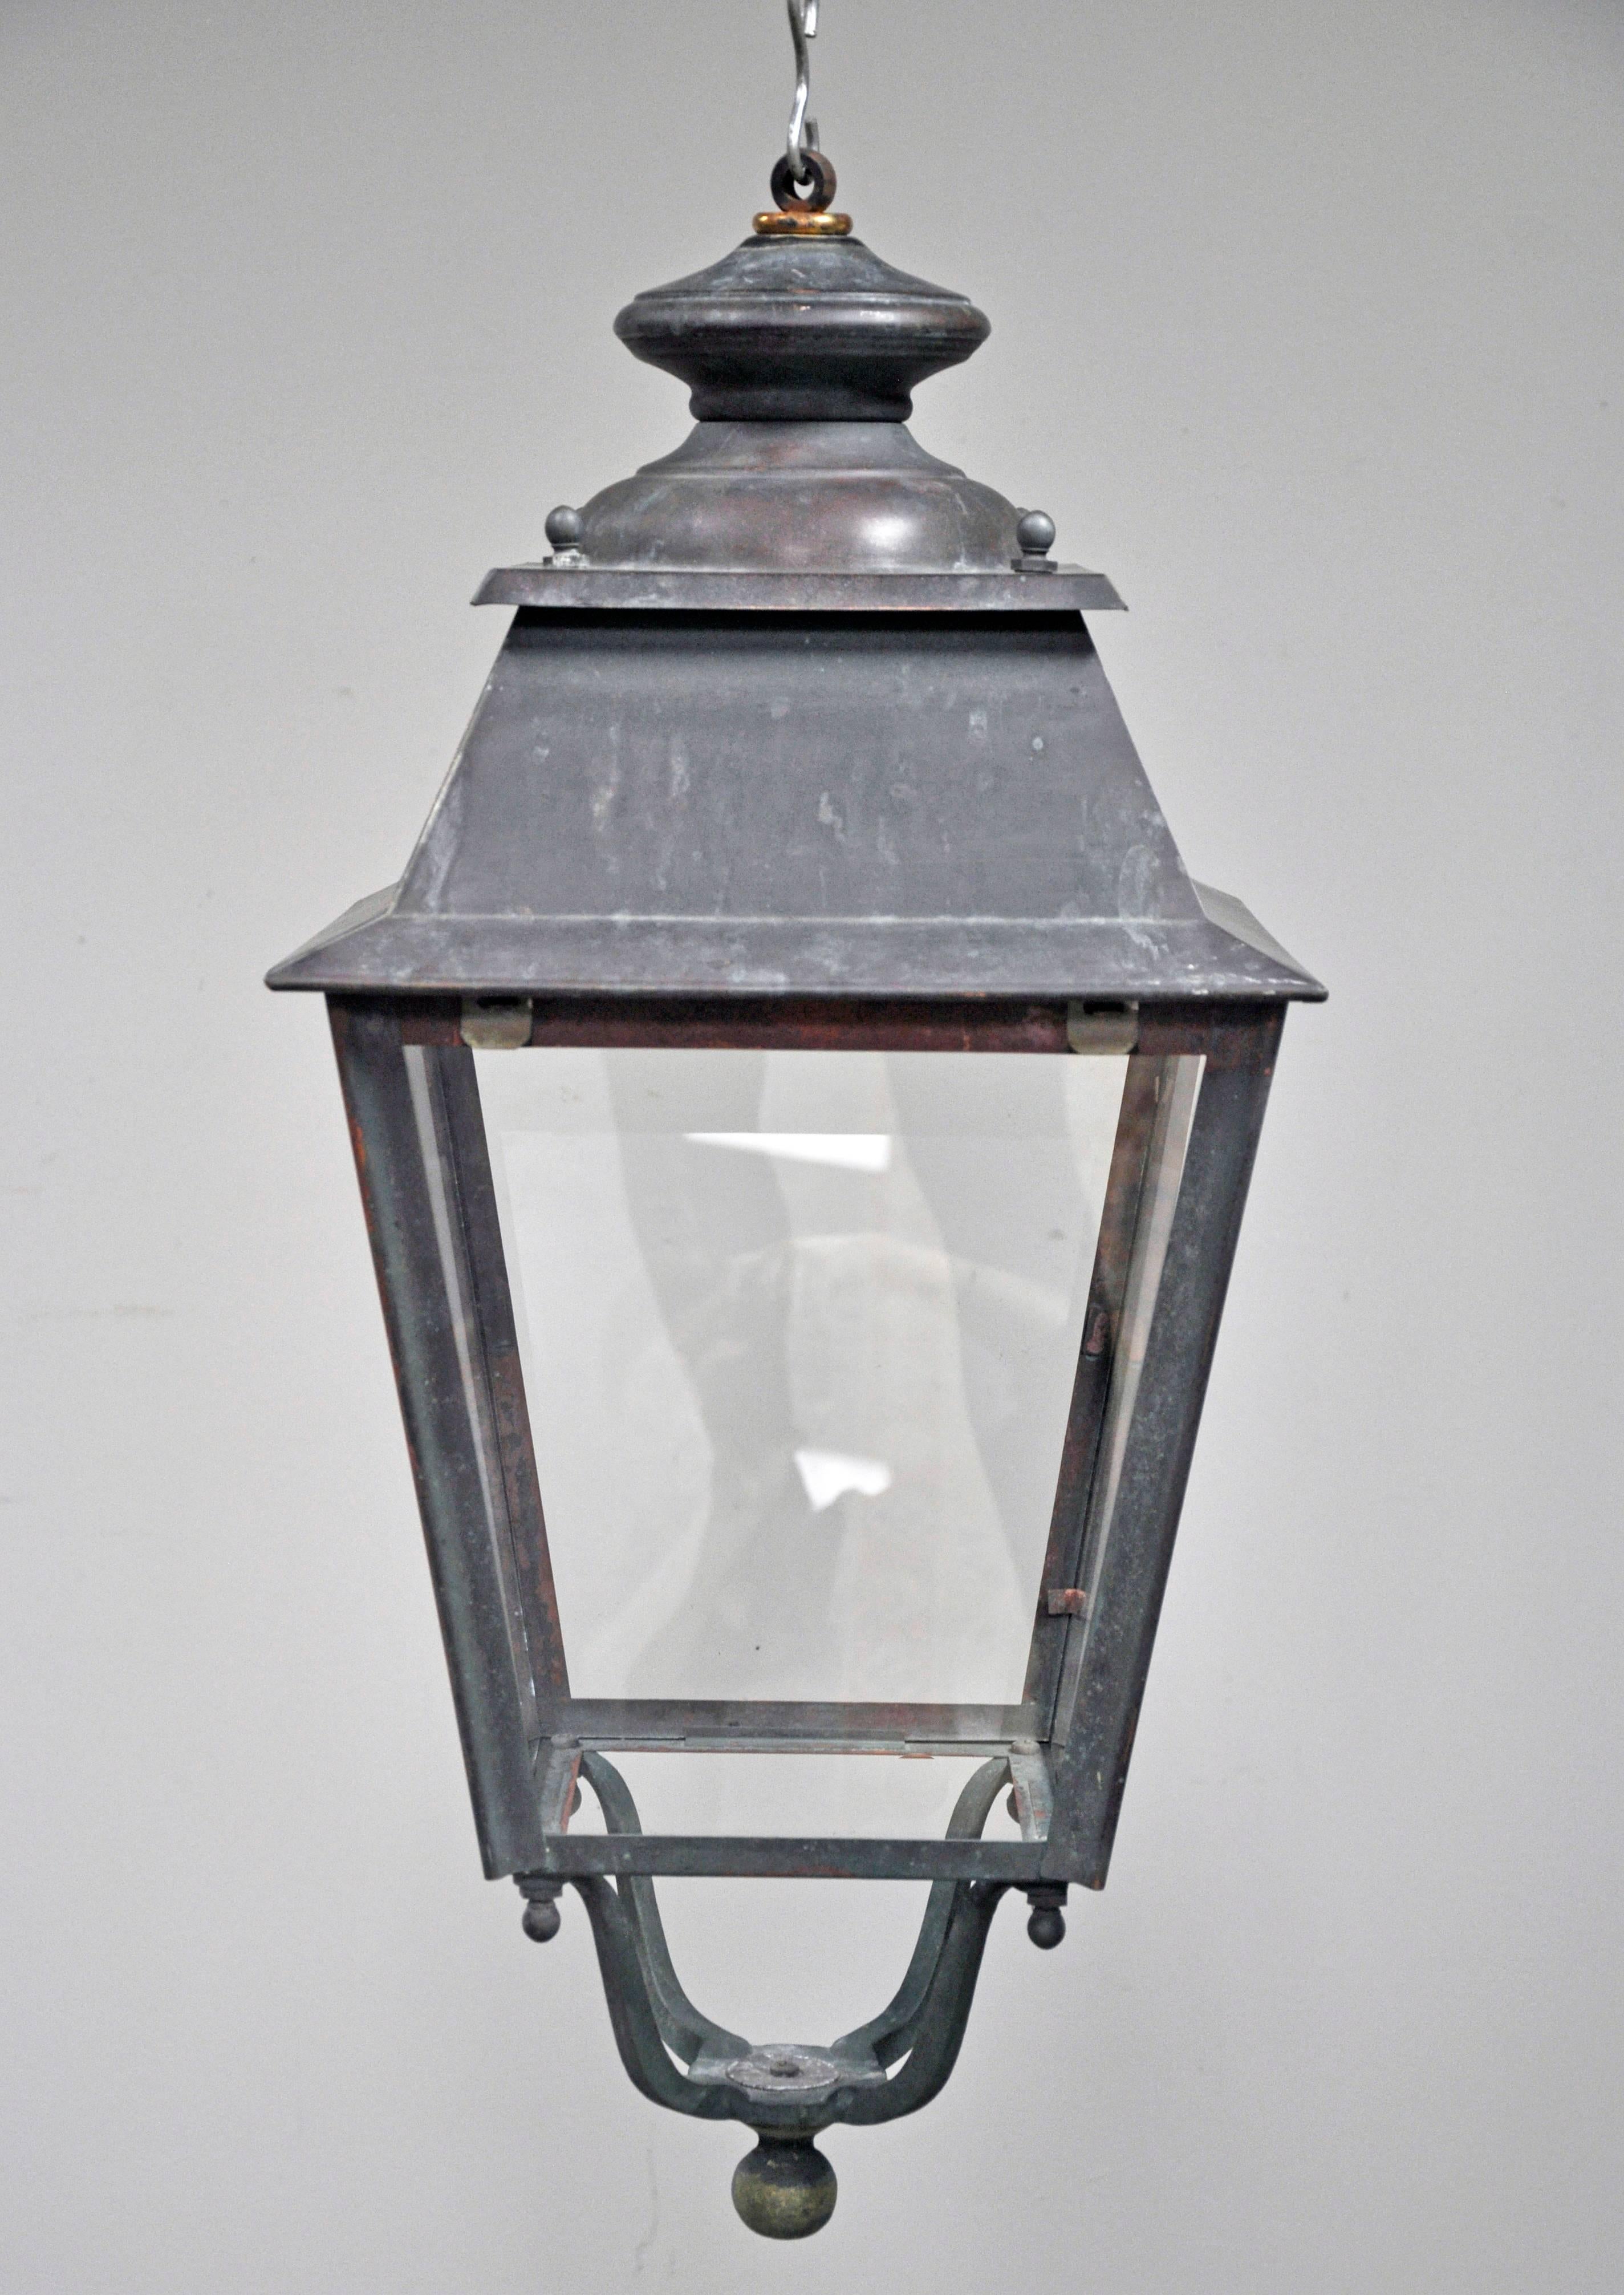 Well-scaled vintage single French porch lantern. Beautifully patinated copper and iron frame four tapered glass sides with visible areas of verdigris. Ball shaped finials decorate each of the four corners and are repeated at X-shaped base while also